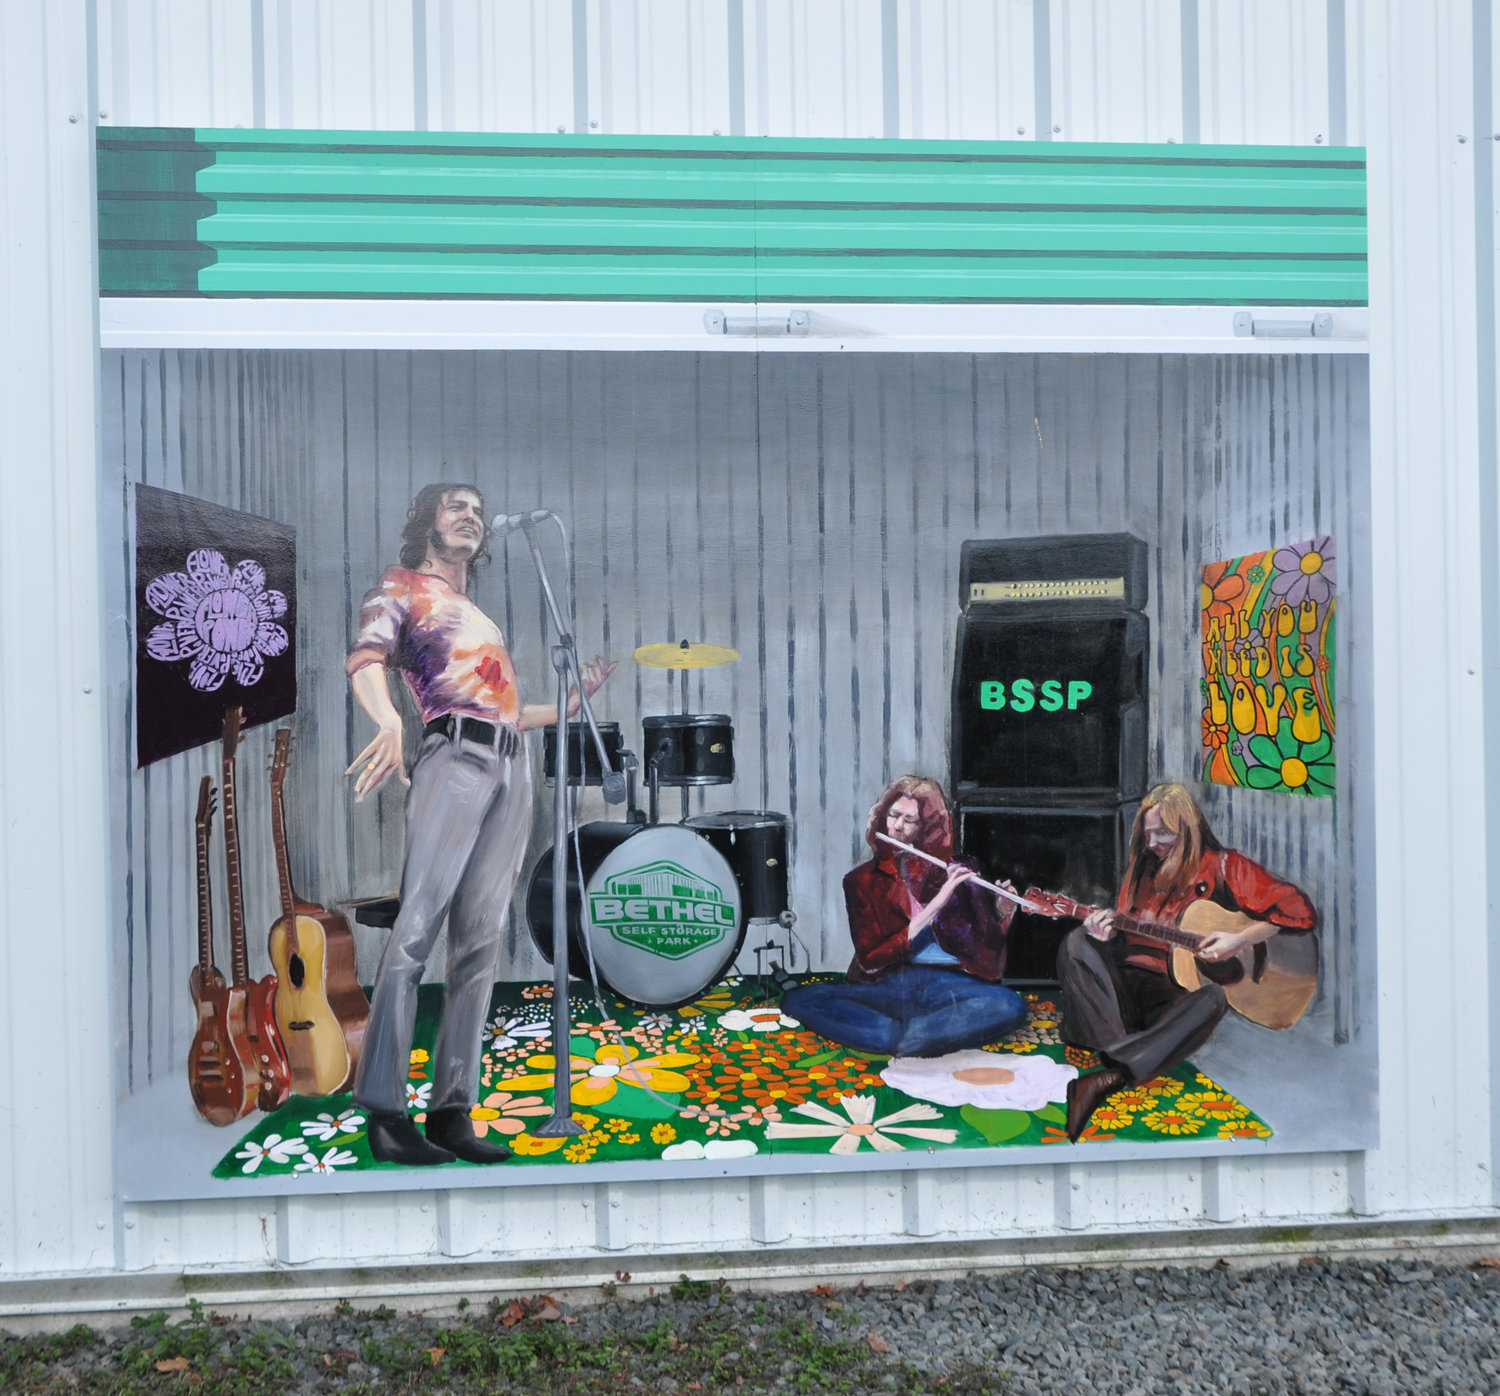 You might have to look twice if you think you see hippies rehearsing for a concert in this open storage facility on Route 17B in Bethel, NY.